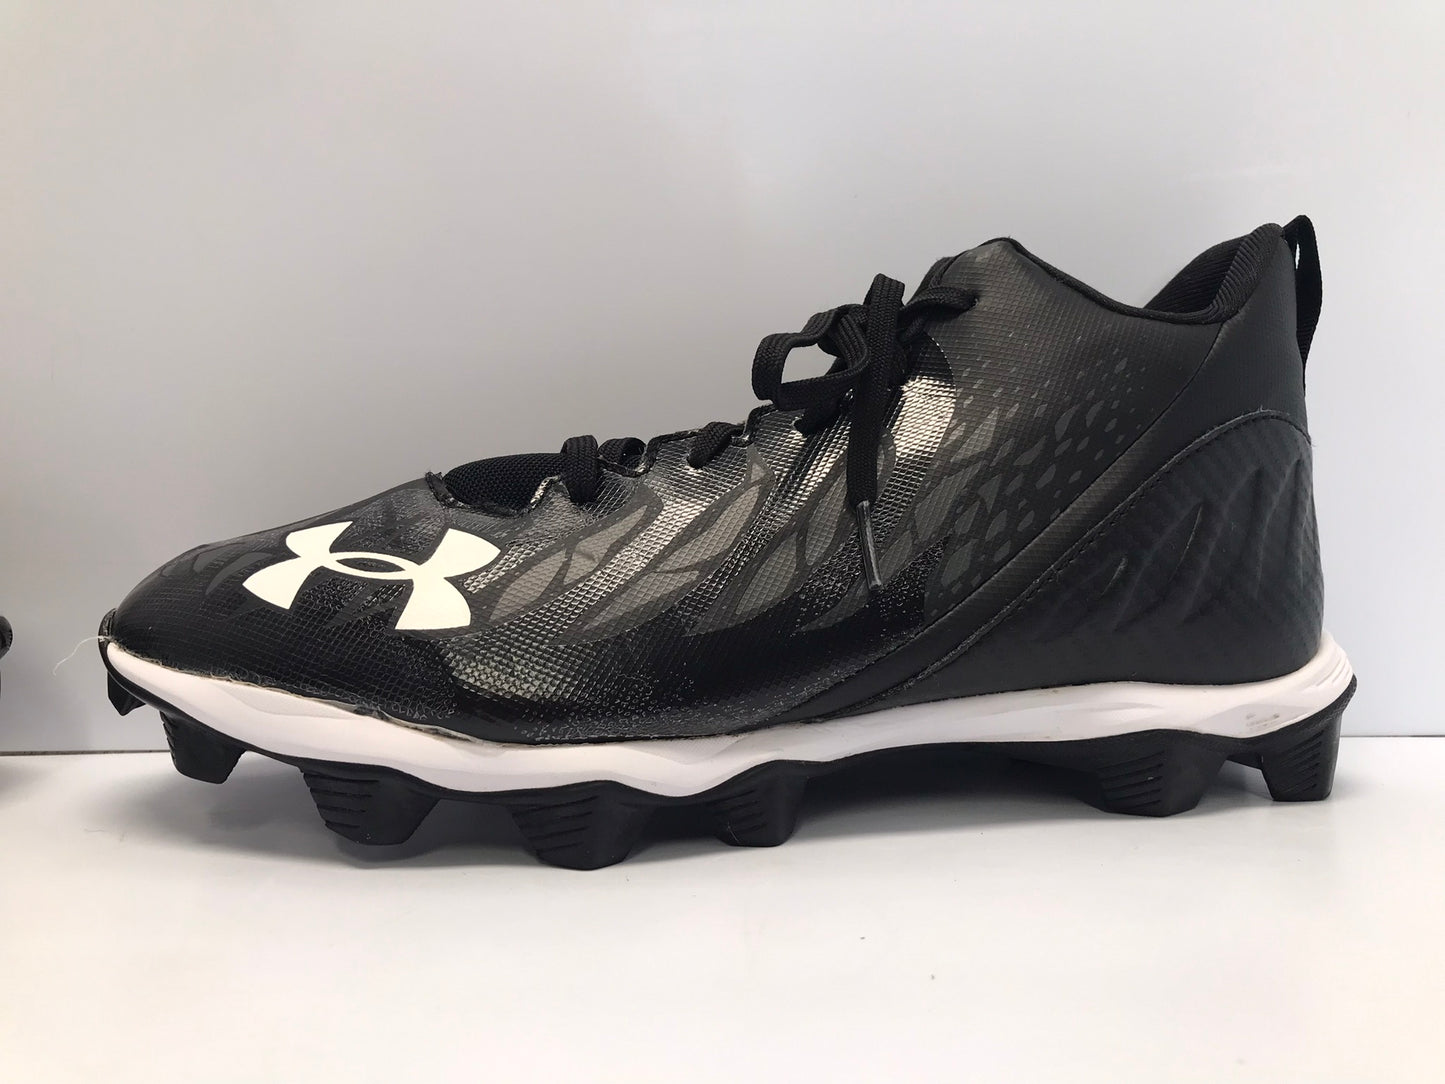 Baseball Shoes Cleats Men's Size 10 Under Armour Black White Like New